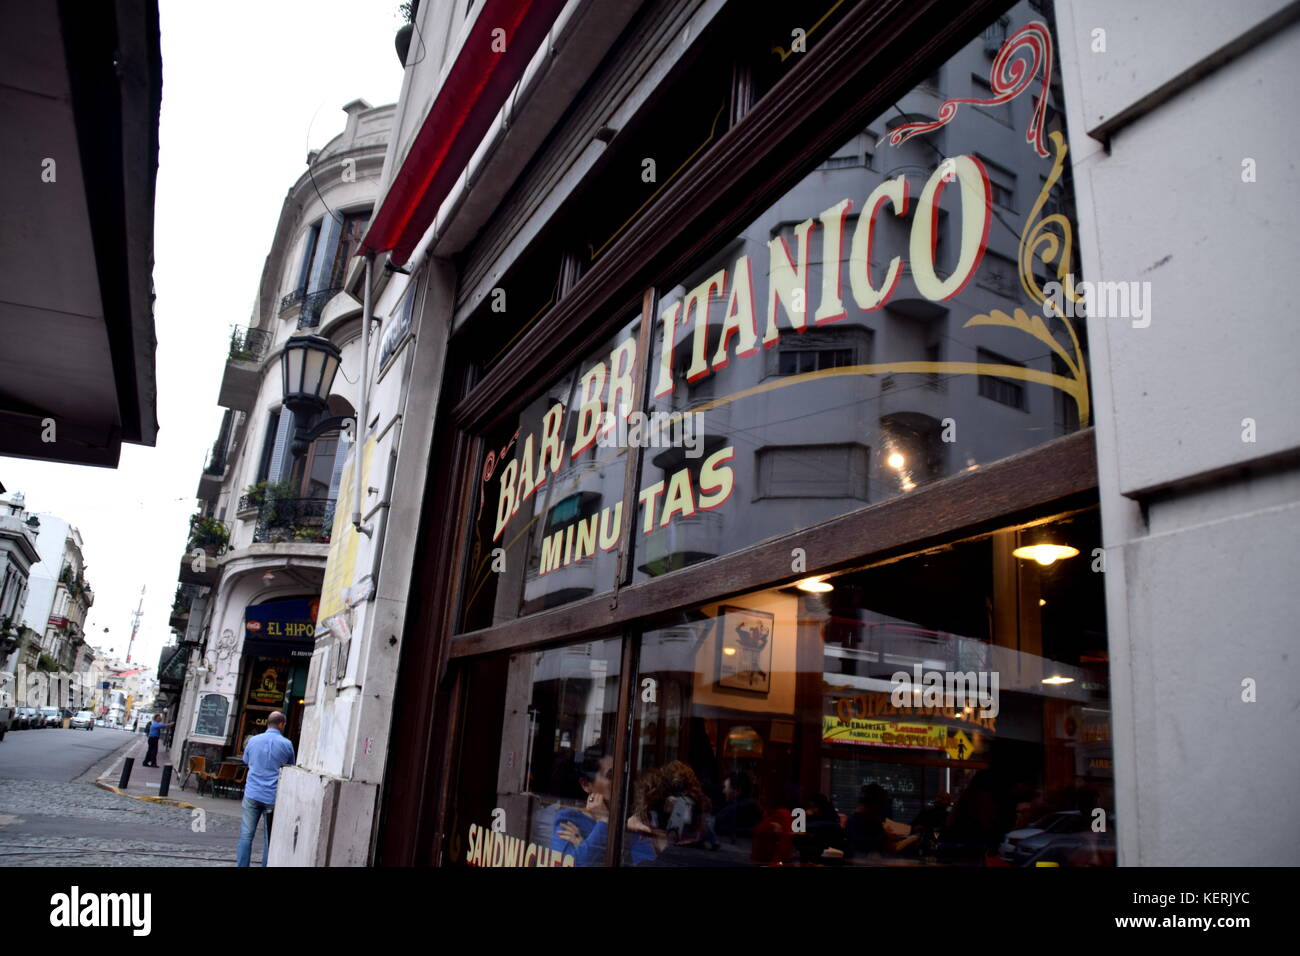 Bar BRITANICO (British) - notable and classic bars of the Buenos Aires city - traditional pub -  restaurante in San Telmo Stock Photo